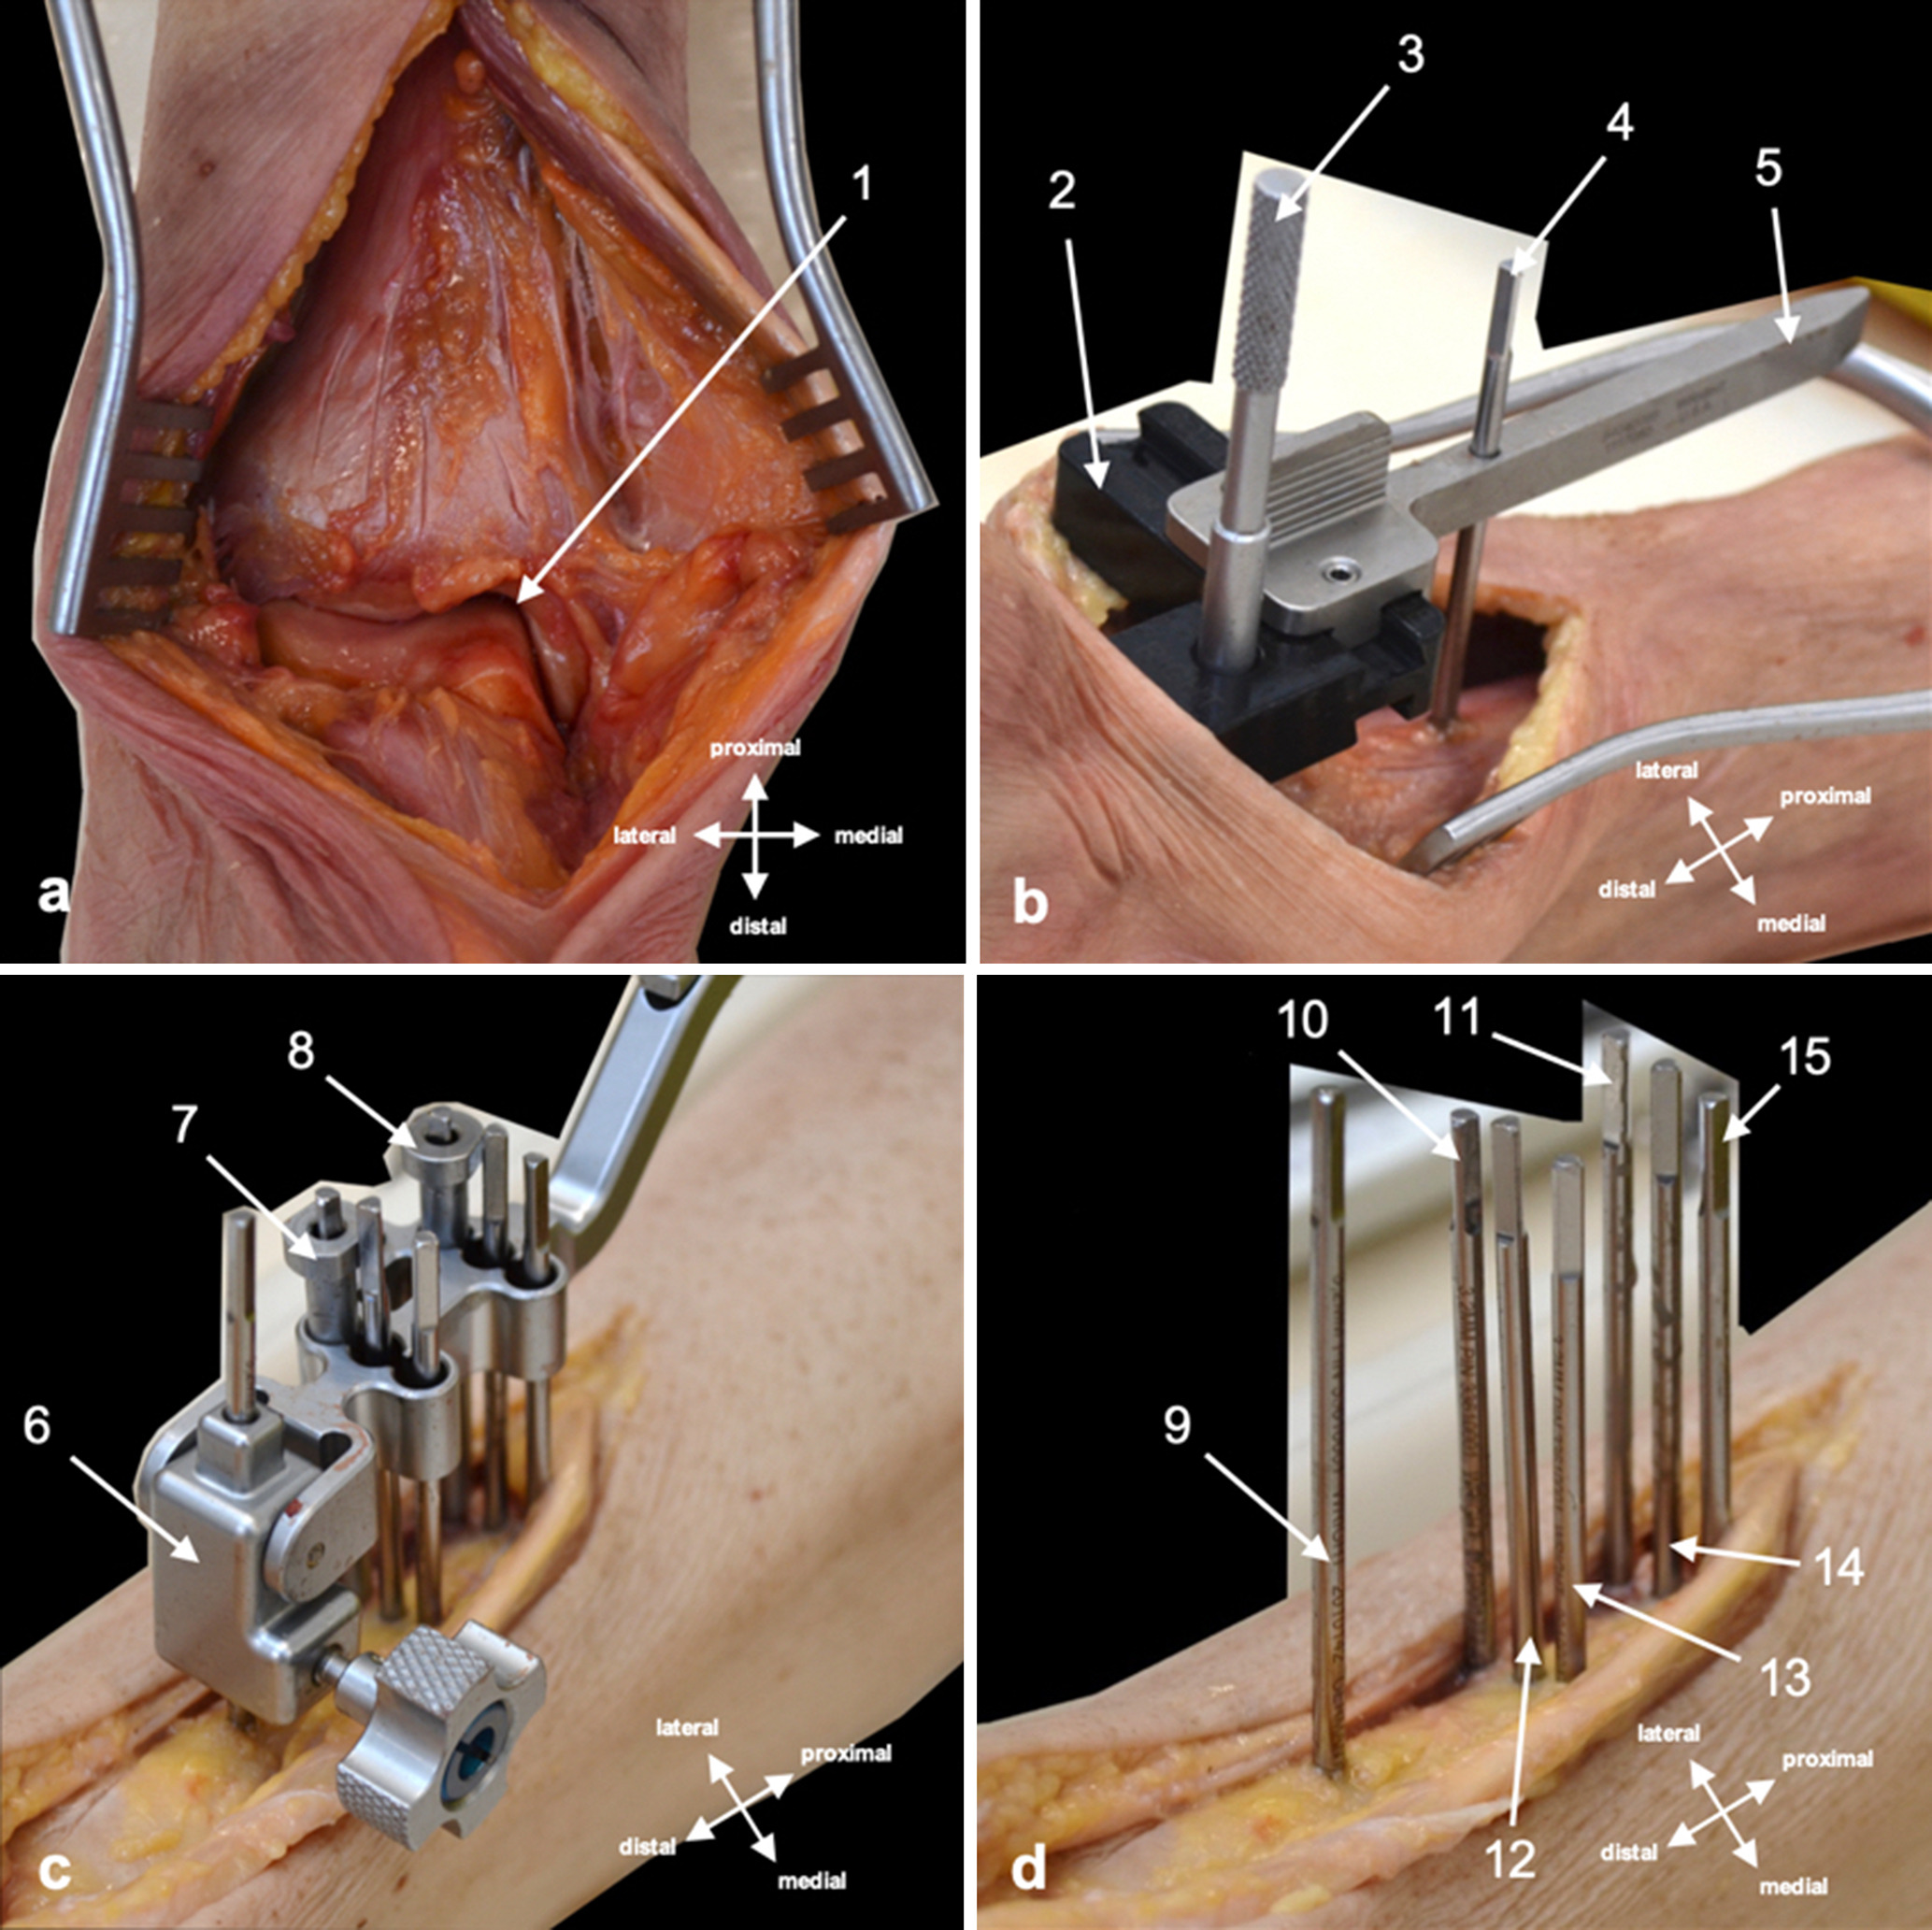 Fig. 1 
          This figure demonstrates exposing the anterior ankle joint; a) and installing all relevant transcortical pins (b to d). 1) Ankle joint; 2) rotation guide slide; 3) medial gutter fork; 4) distal most pin; 5) rotation guide pointer; 6) alignment frame; 7) distal pin sleeve; 8) proximal pin sleeve; 9) distal most pin; 10) lateral-distal pin; 11) lateral-proximal pin; 12) central-distal pin; 13) medial-distal pin; 14) central-proximal pin; and 15) medial-proximal pin. These images were acquired with appropriate consent in accordance with the Human Tissue Act 2006.
        